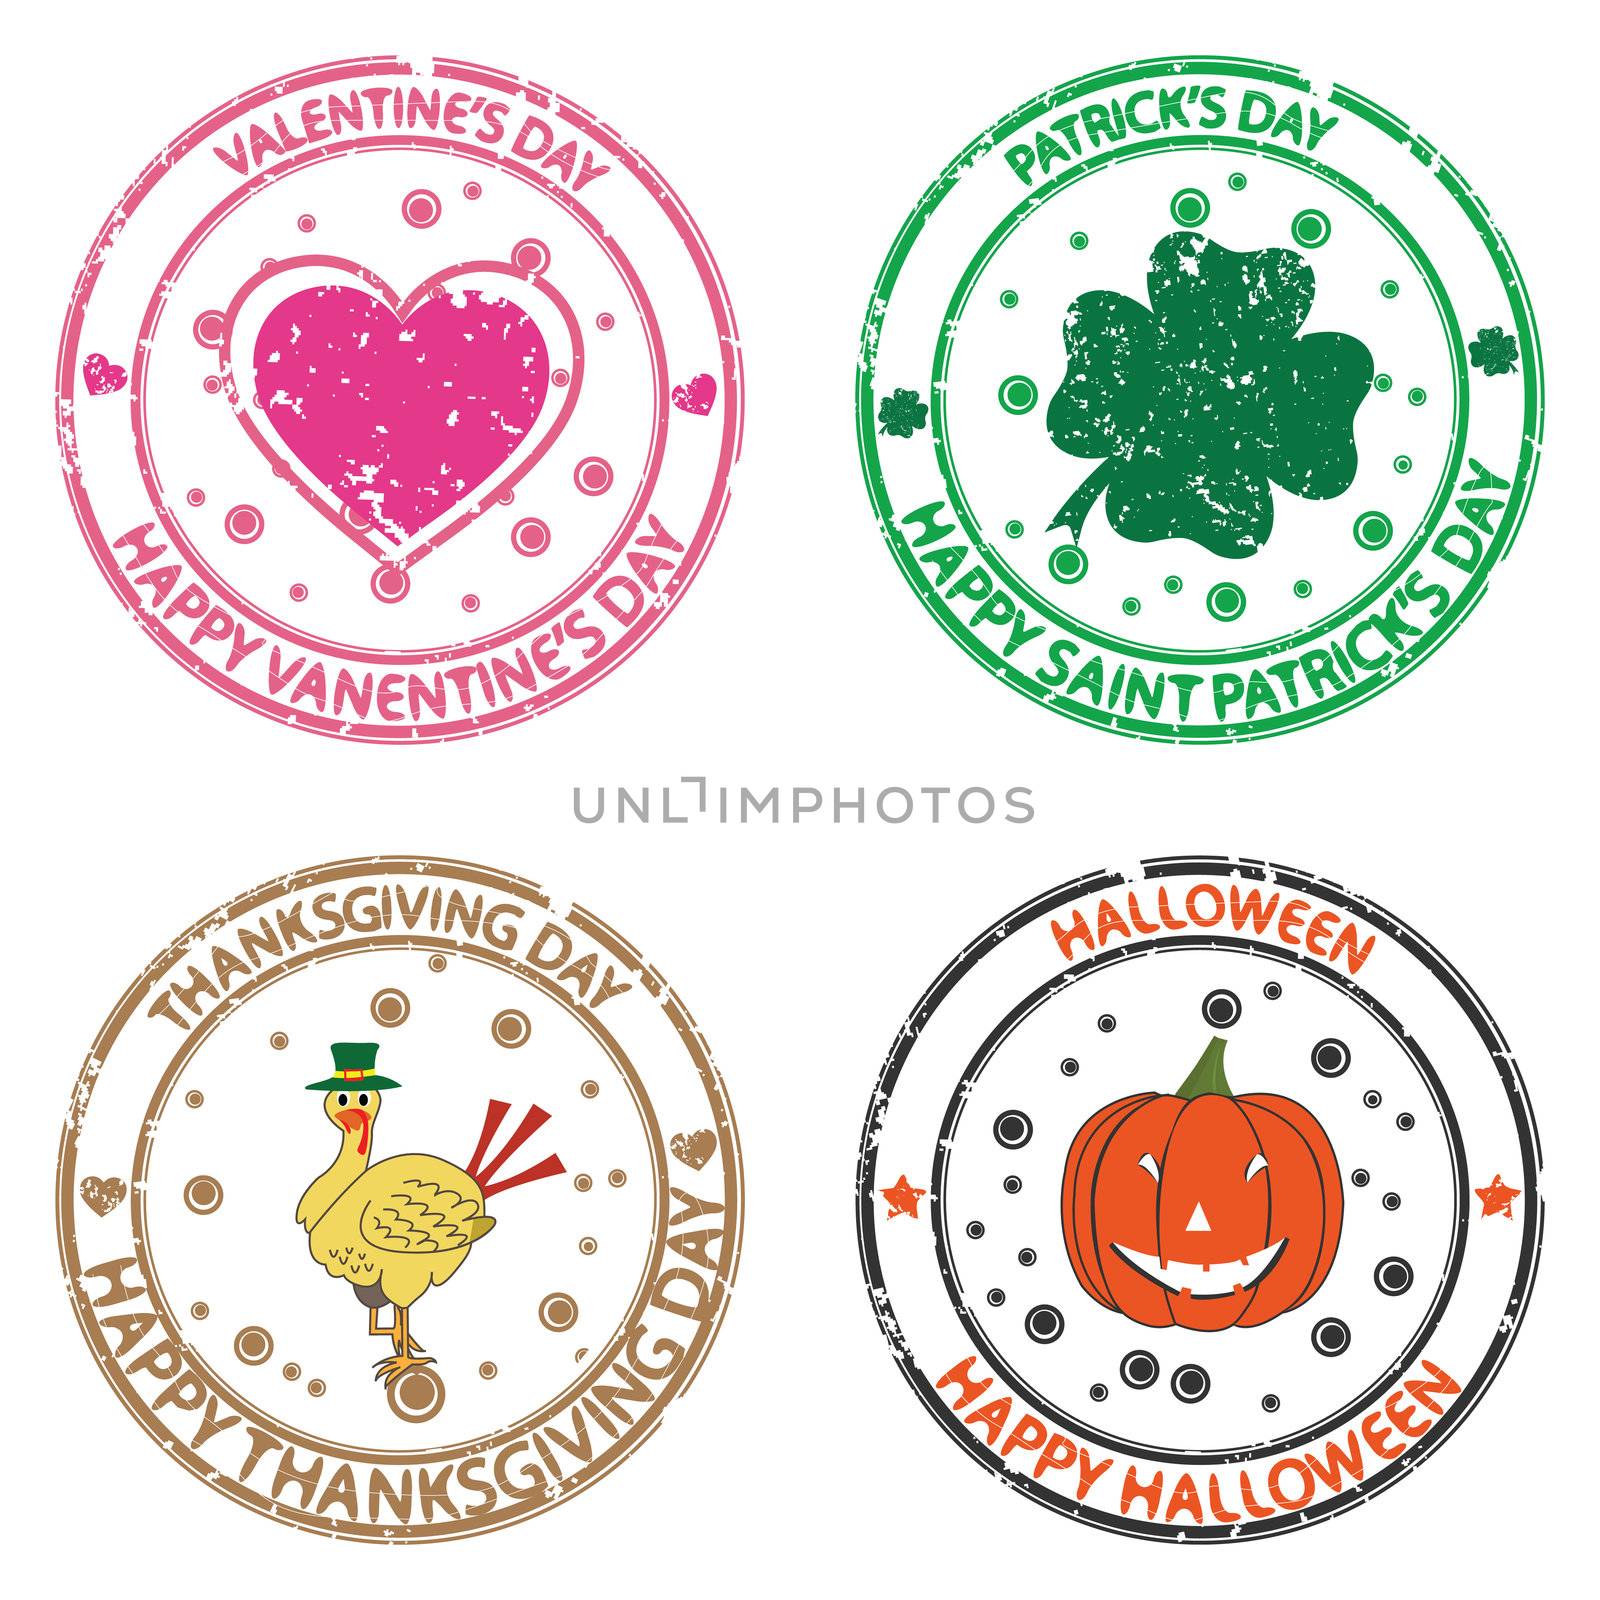 anniversary stamps set against white background, abstract vector art illustration